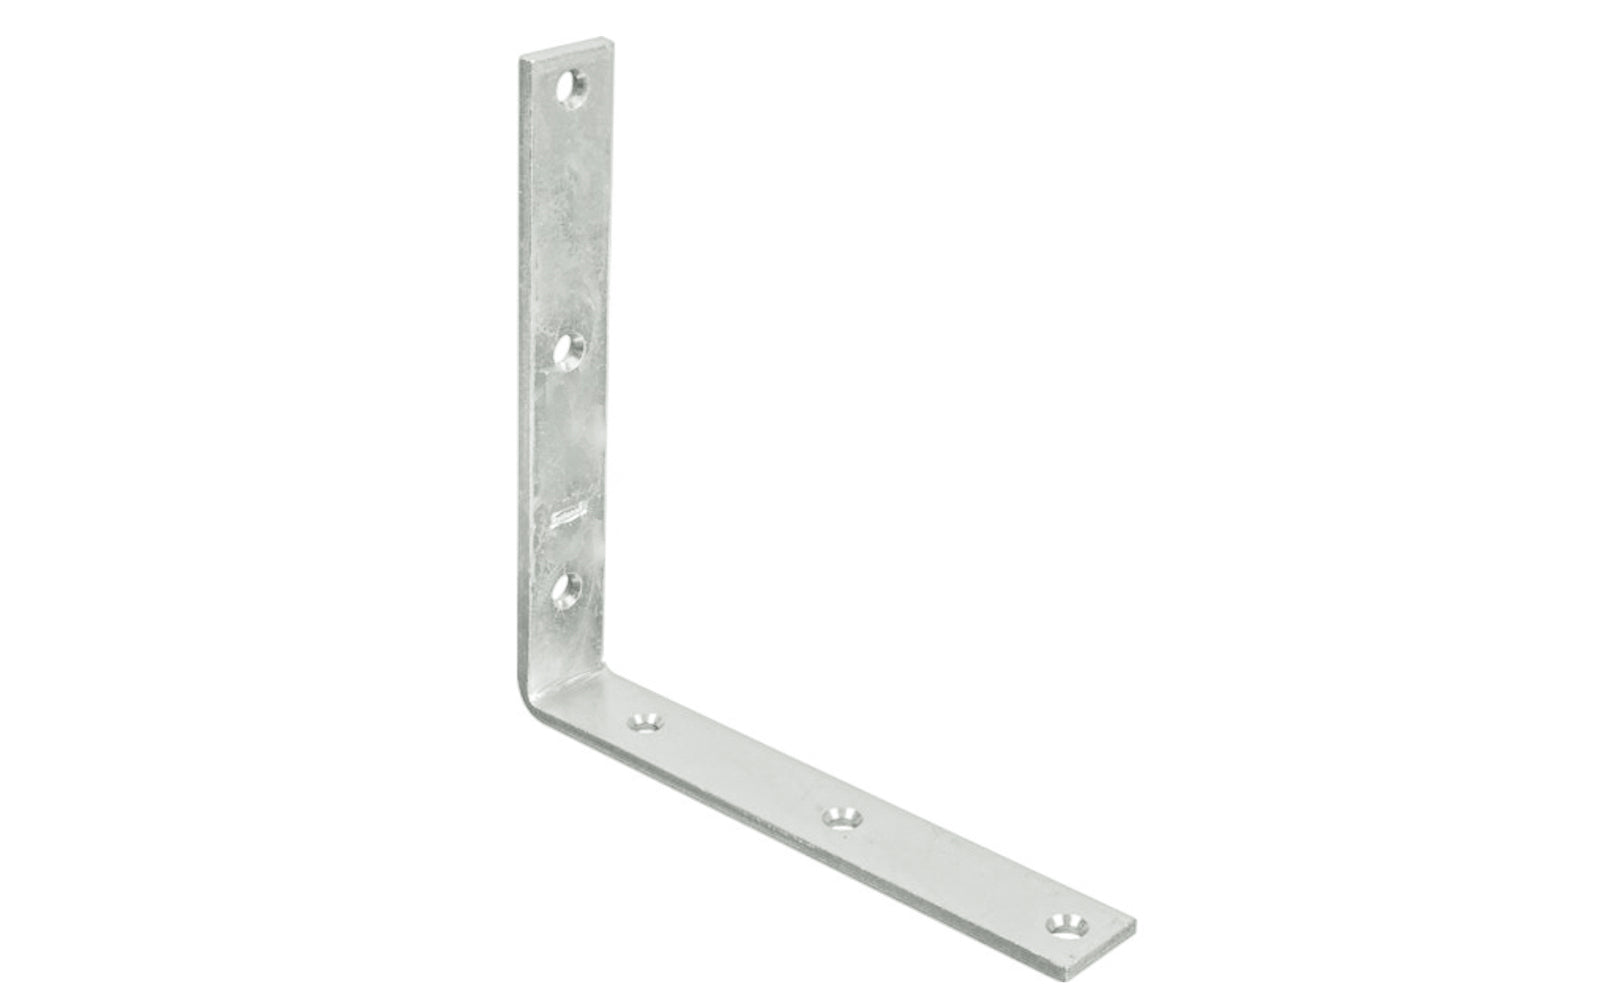 These corner braces are designed for furniture, cabinets, shelving support. Allows for quick & easy repair of items in the workshop, home, etc. Made of steel material with a zinc plated finish. Manufactured from hot-rolled steel. Countersunk holes. 8" long size x 1-1/4" width. National Hardware - Model N220-178.